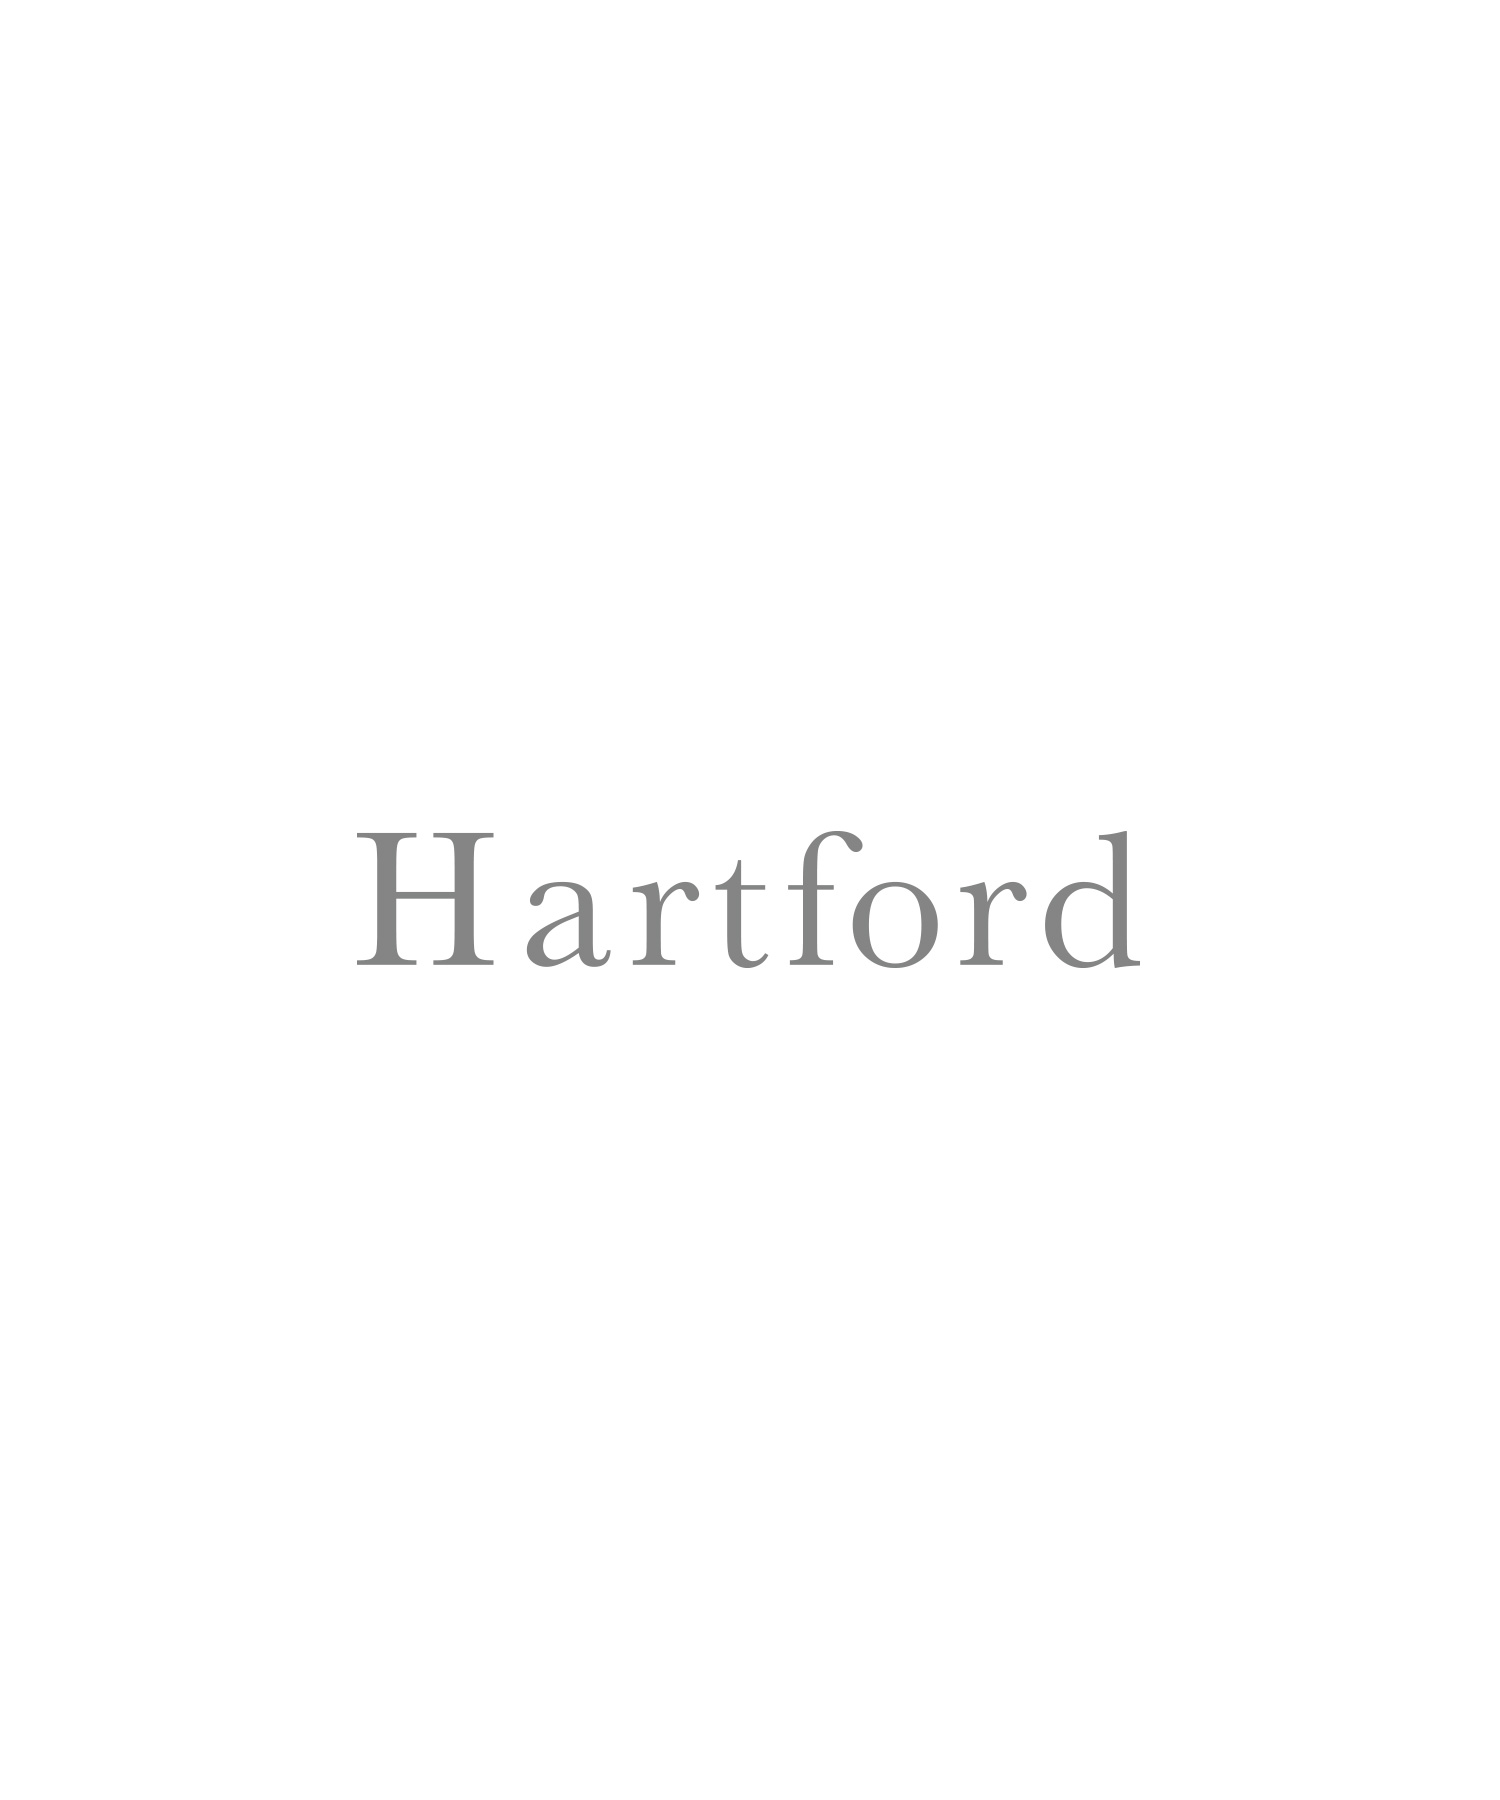 Kids T-Shirt, Sweatshirt & Jackets| Hartford, Casual Chic outfit for Kids